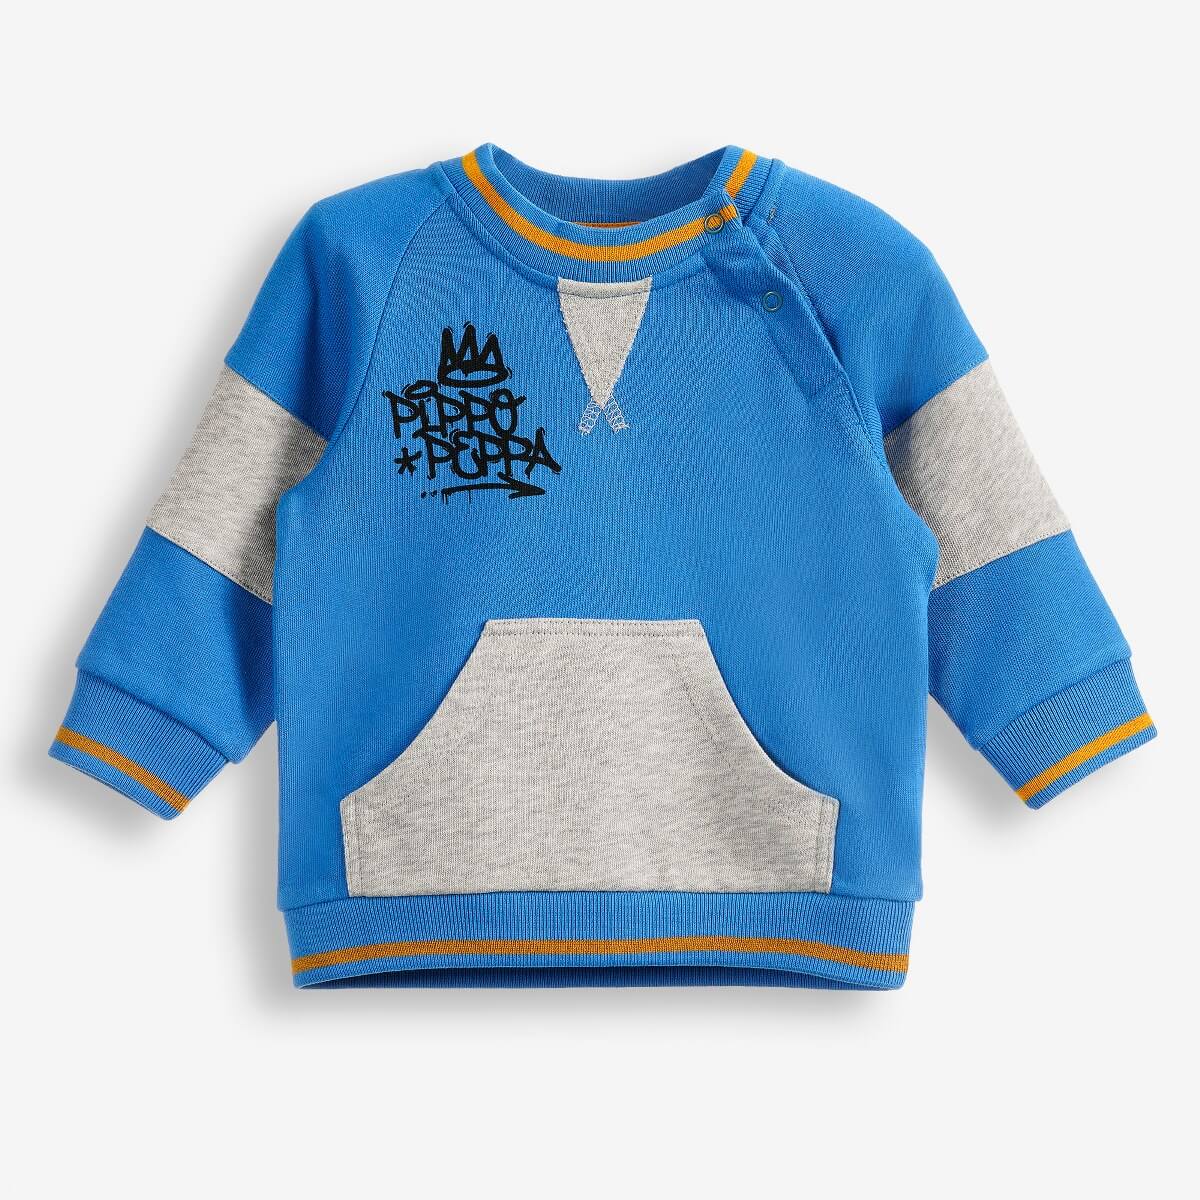 Baby Boys' Two-Piece Set with Pants and a Sweatshirt